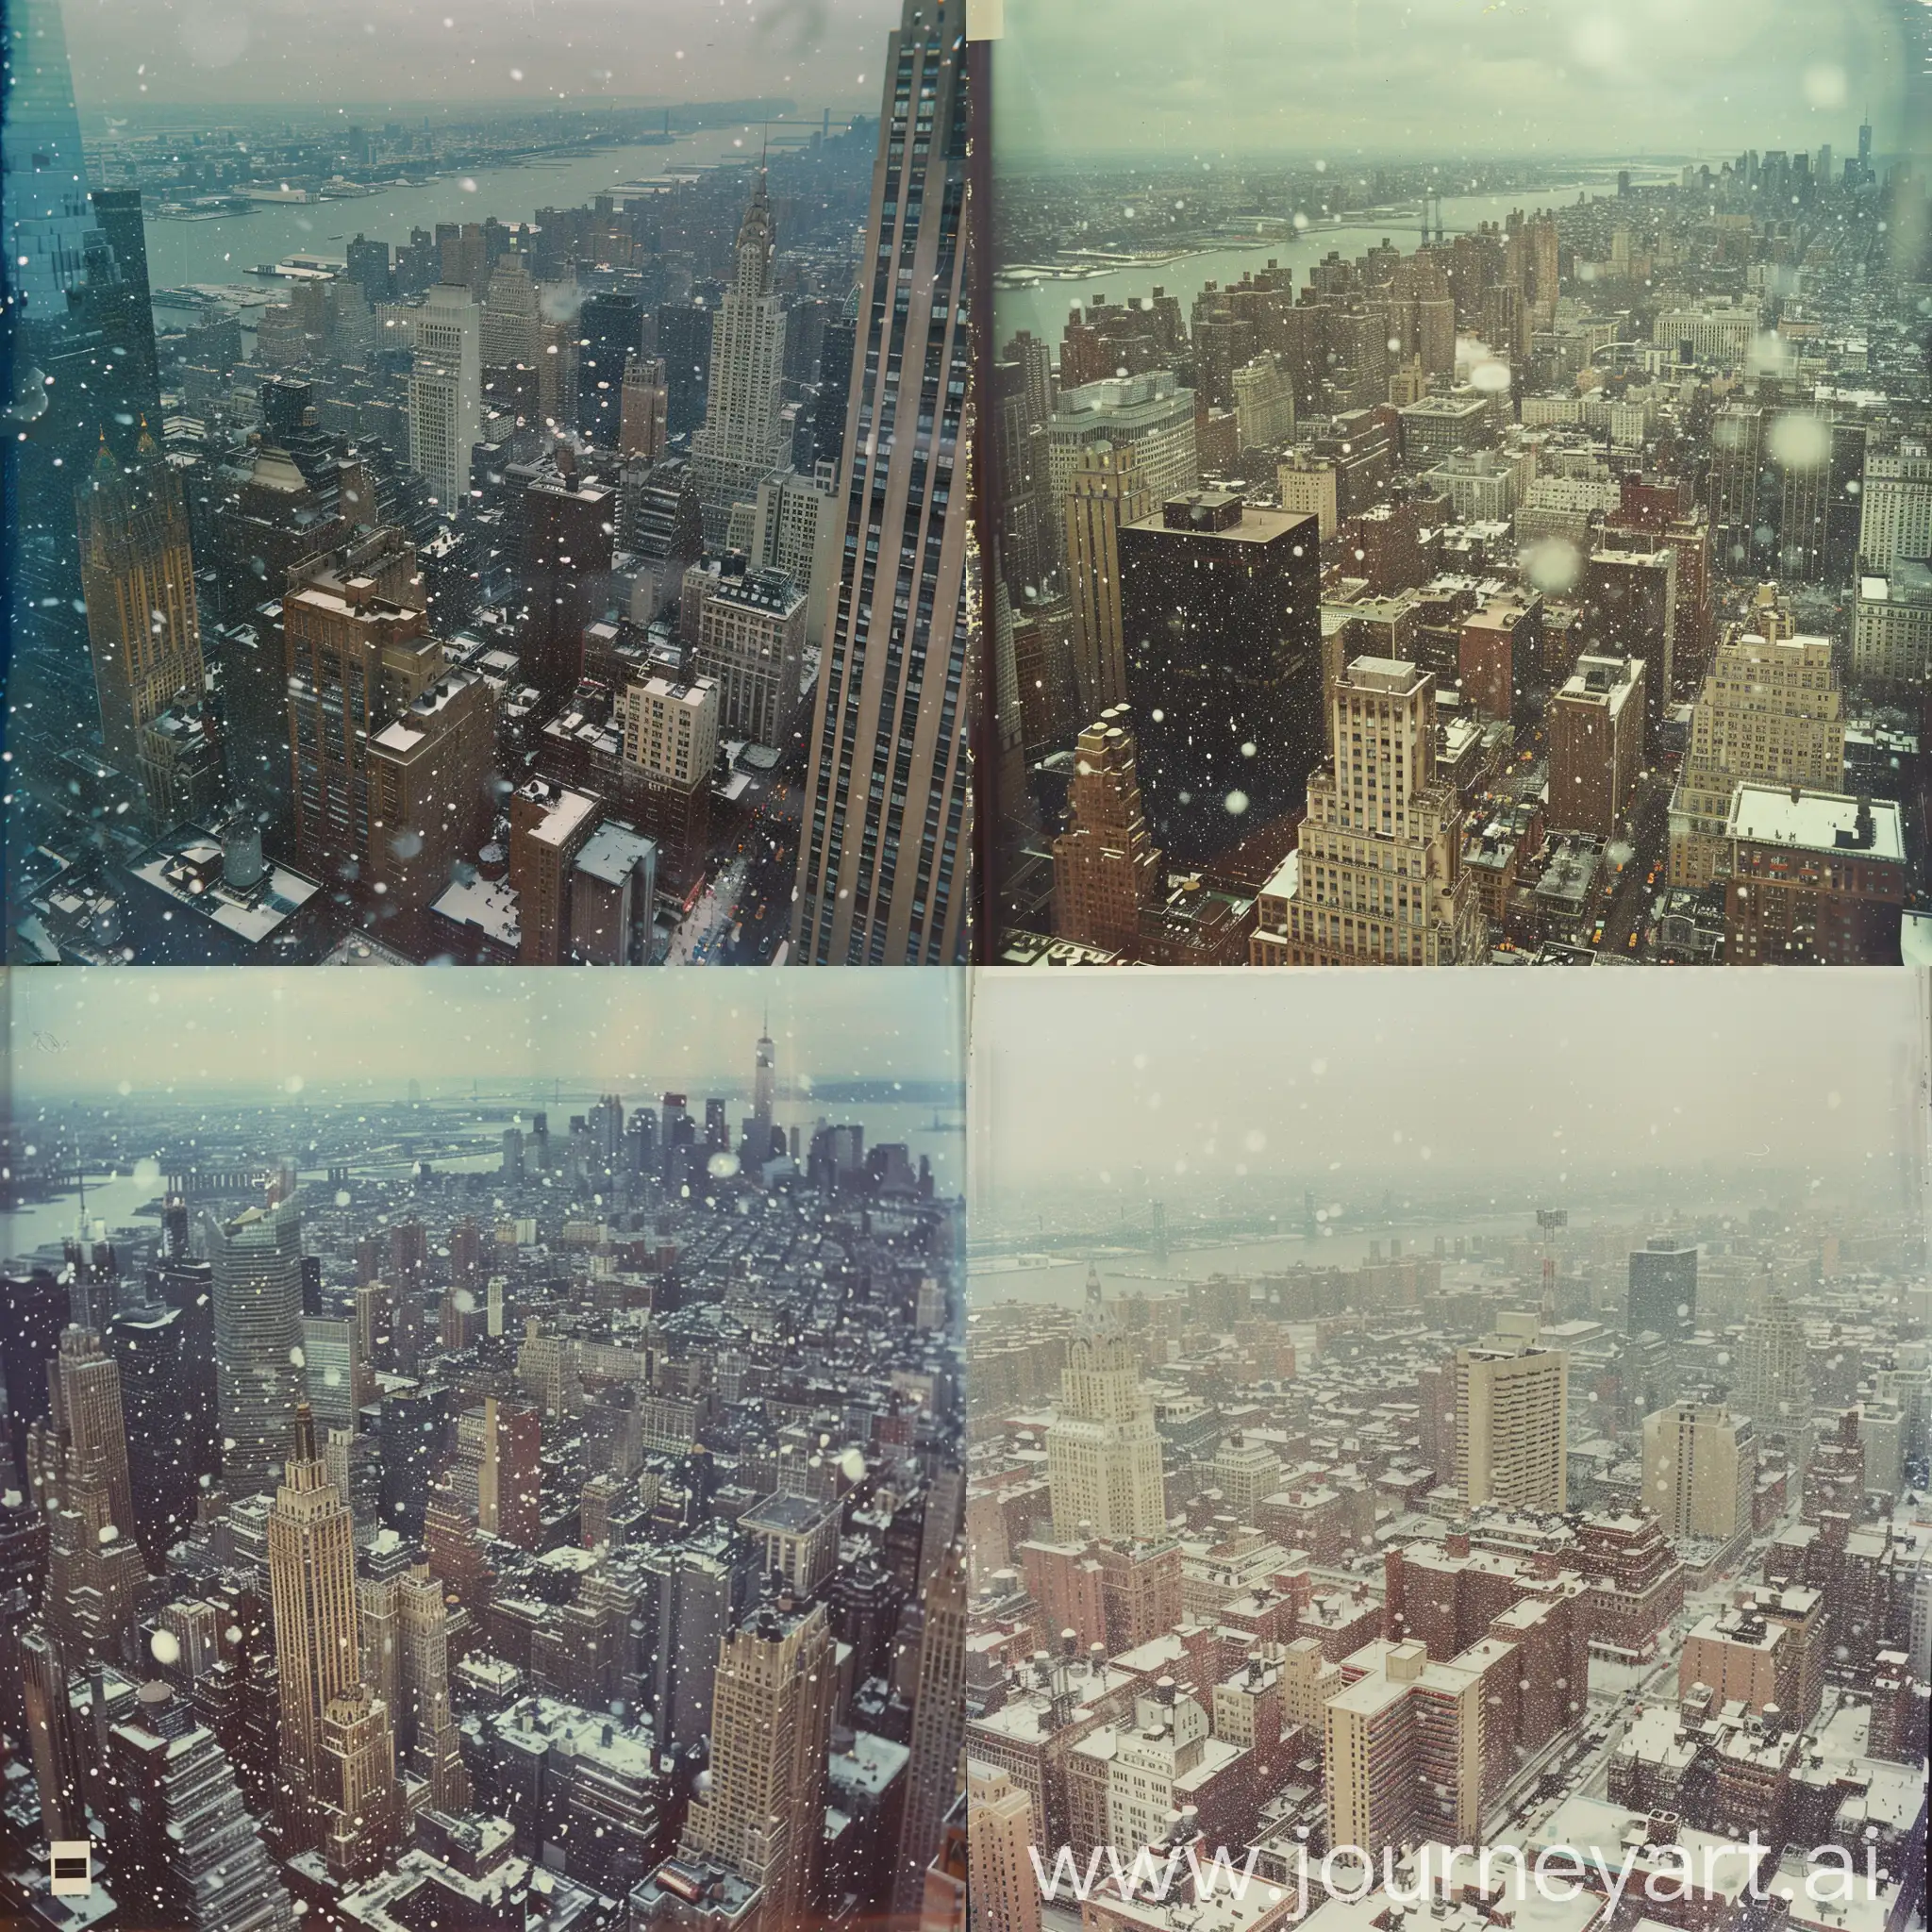 Aerial-View-of-1970s-New-York-City-in-Snow-Vintage-Polaroid-Snapshot